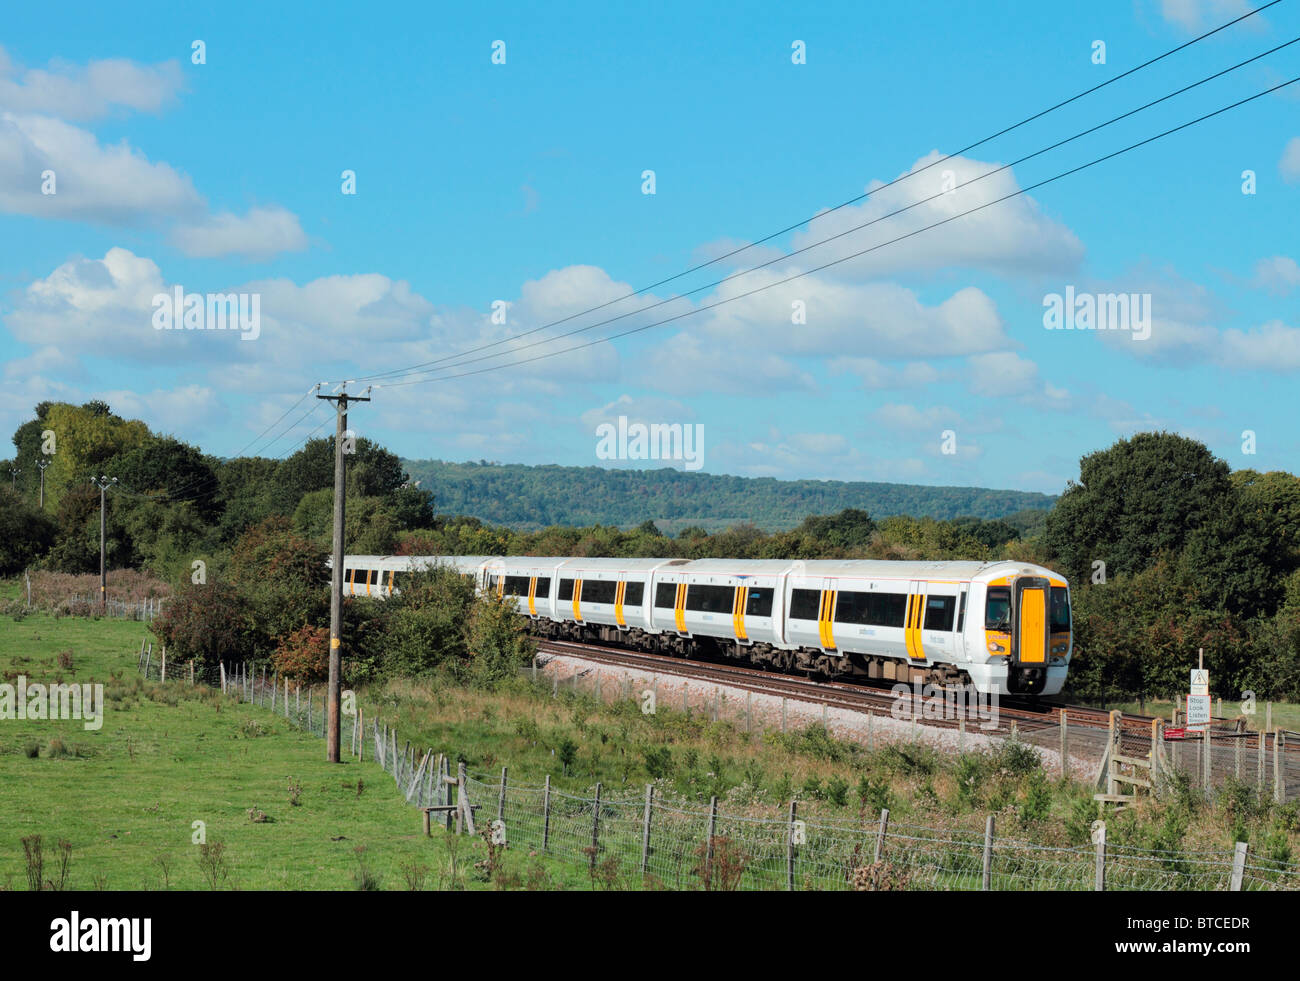 A pair of class 375 Electrostar EMU's Nos. 375 808 and 375 612 with a Southeastern trains service near Kemsing in Kent Stock Photo